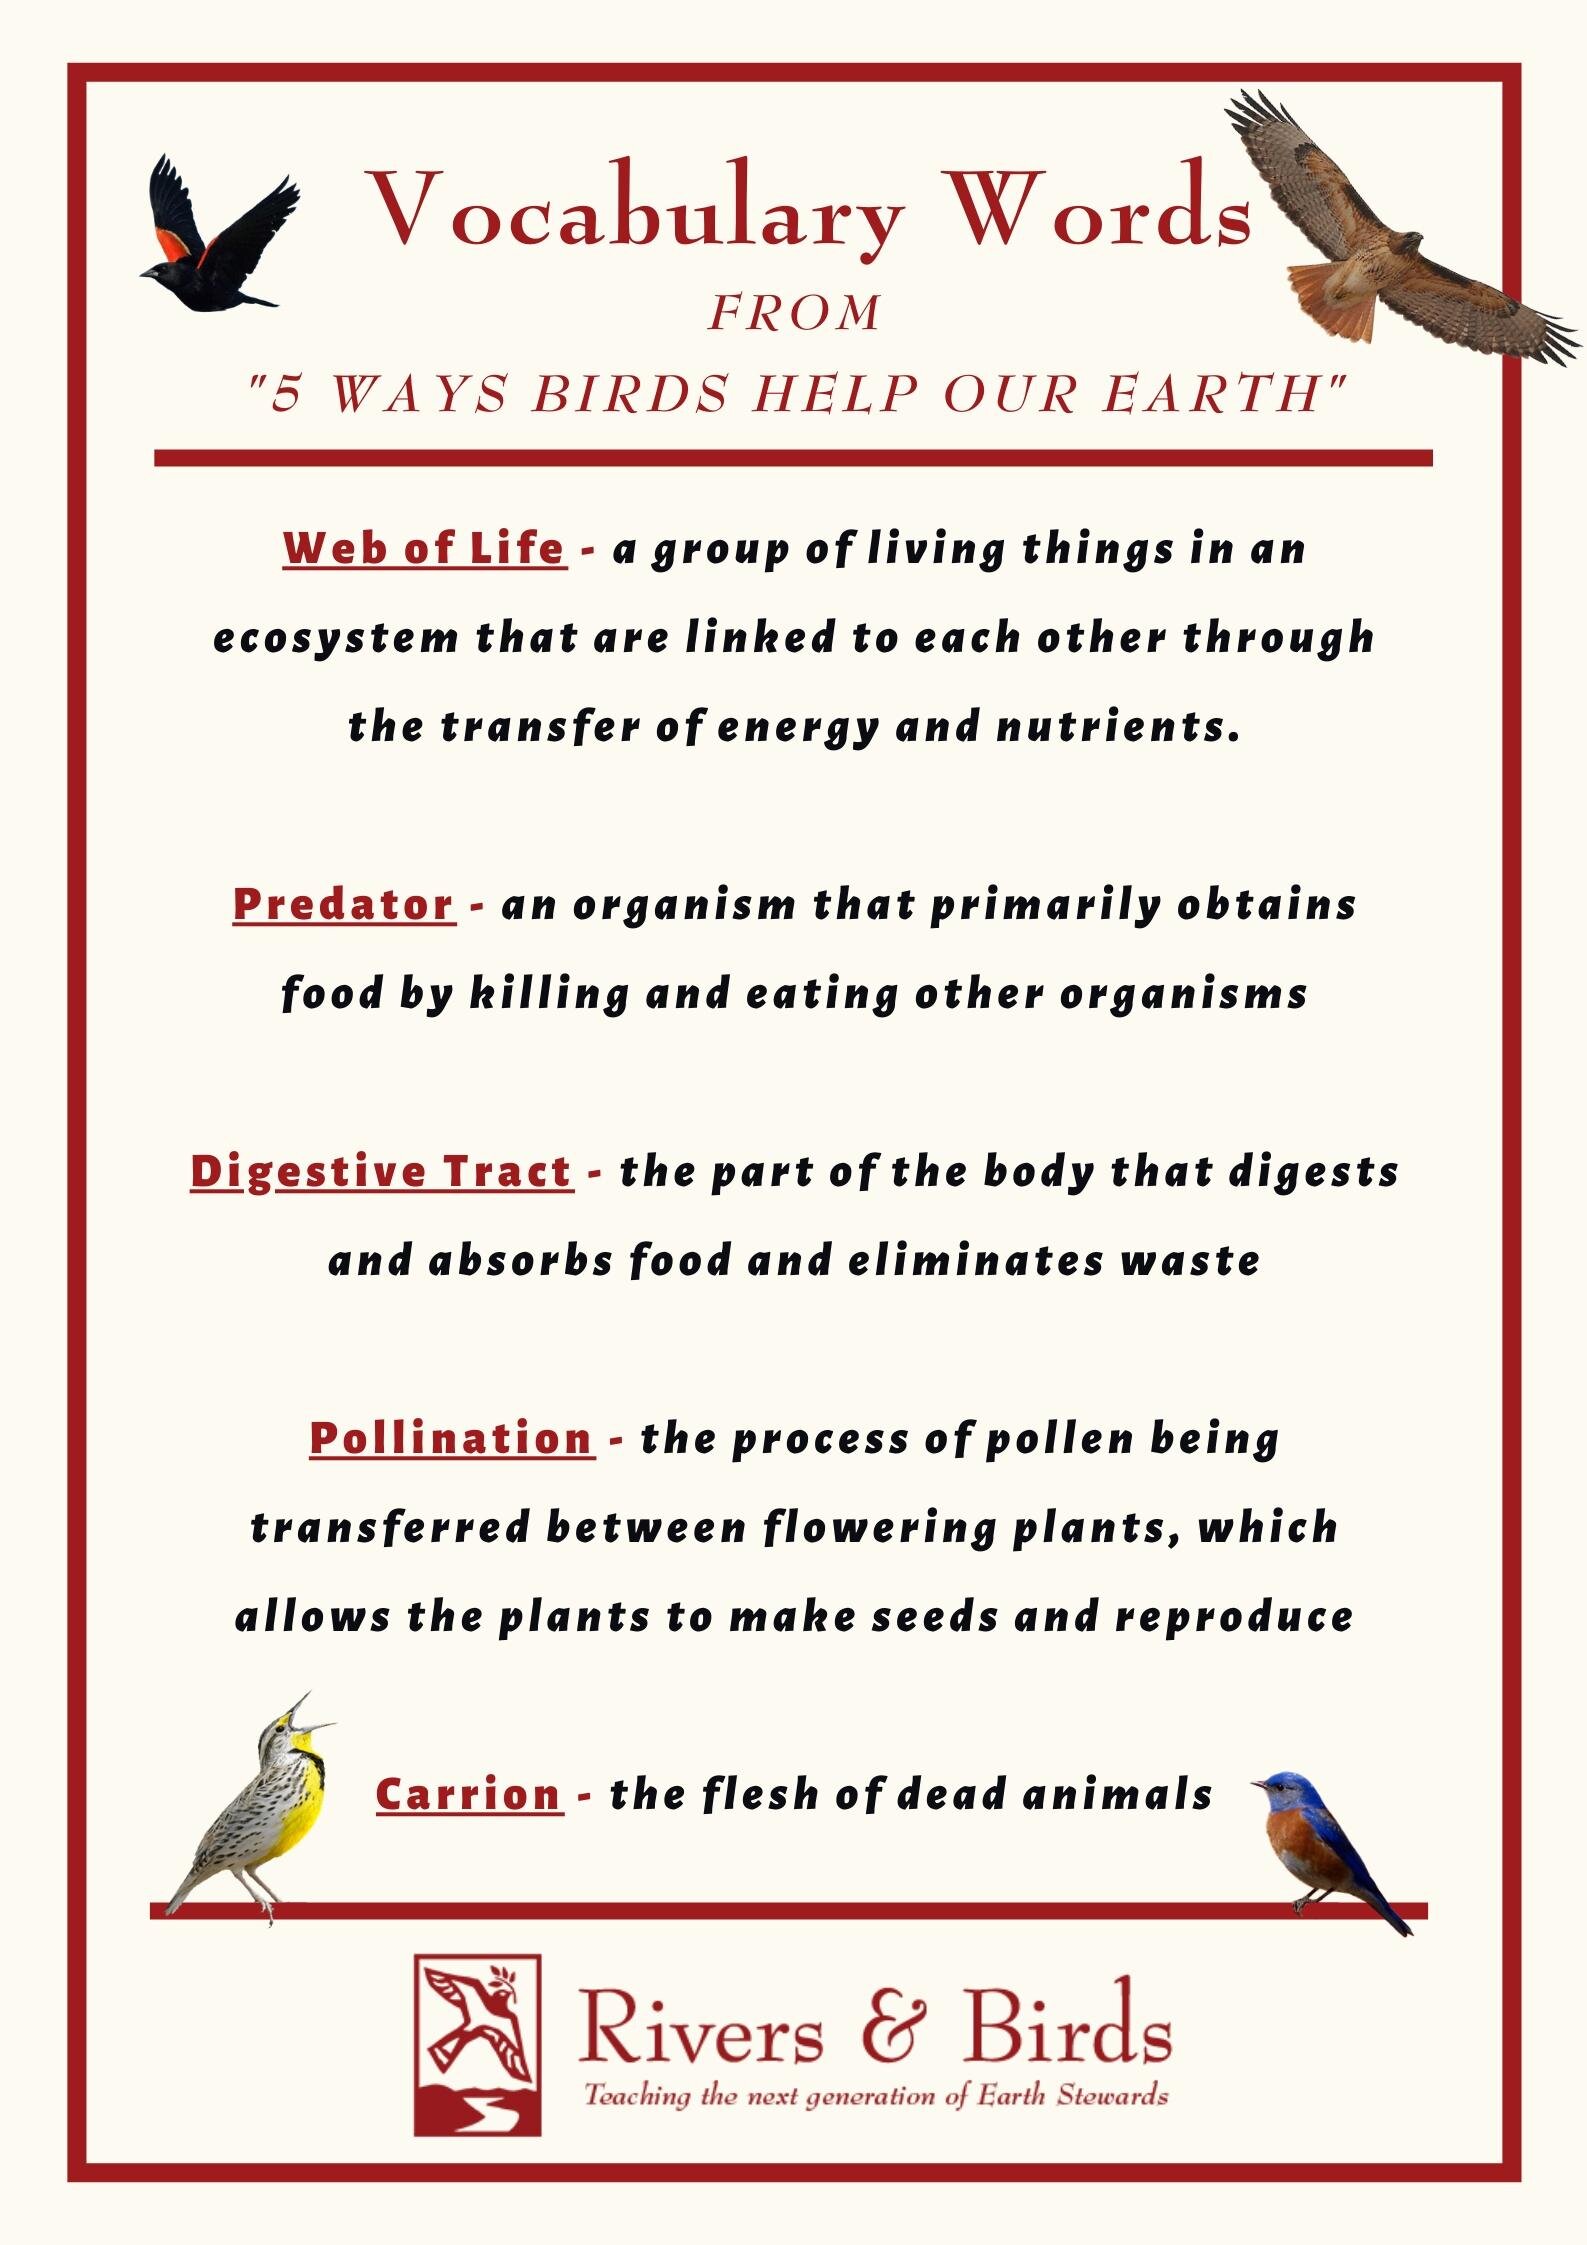 Vocabulary from "5 Ways Birds Help Our Earth" Video